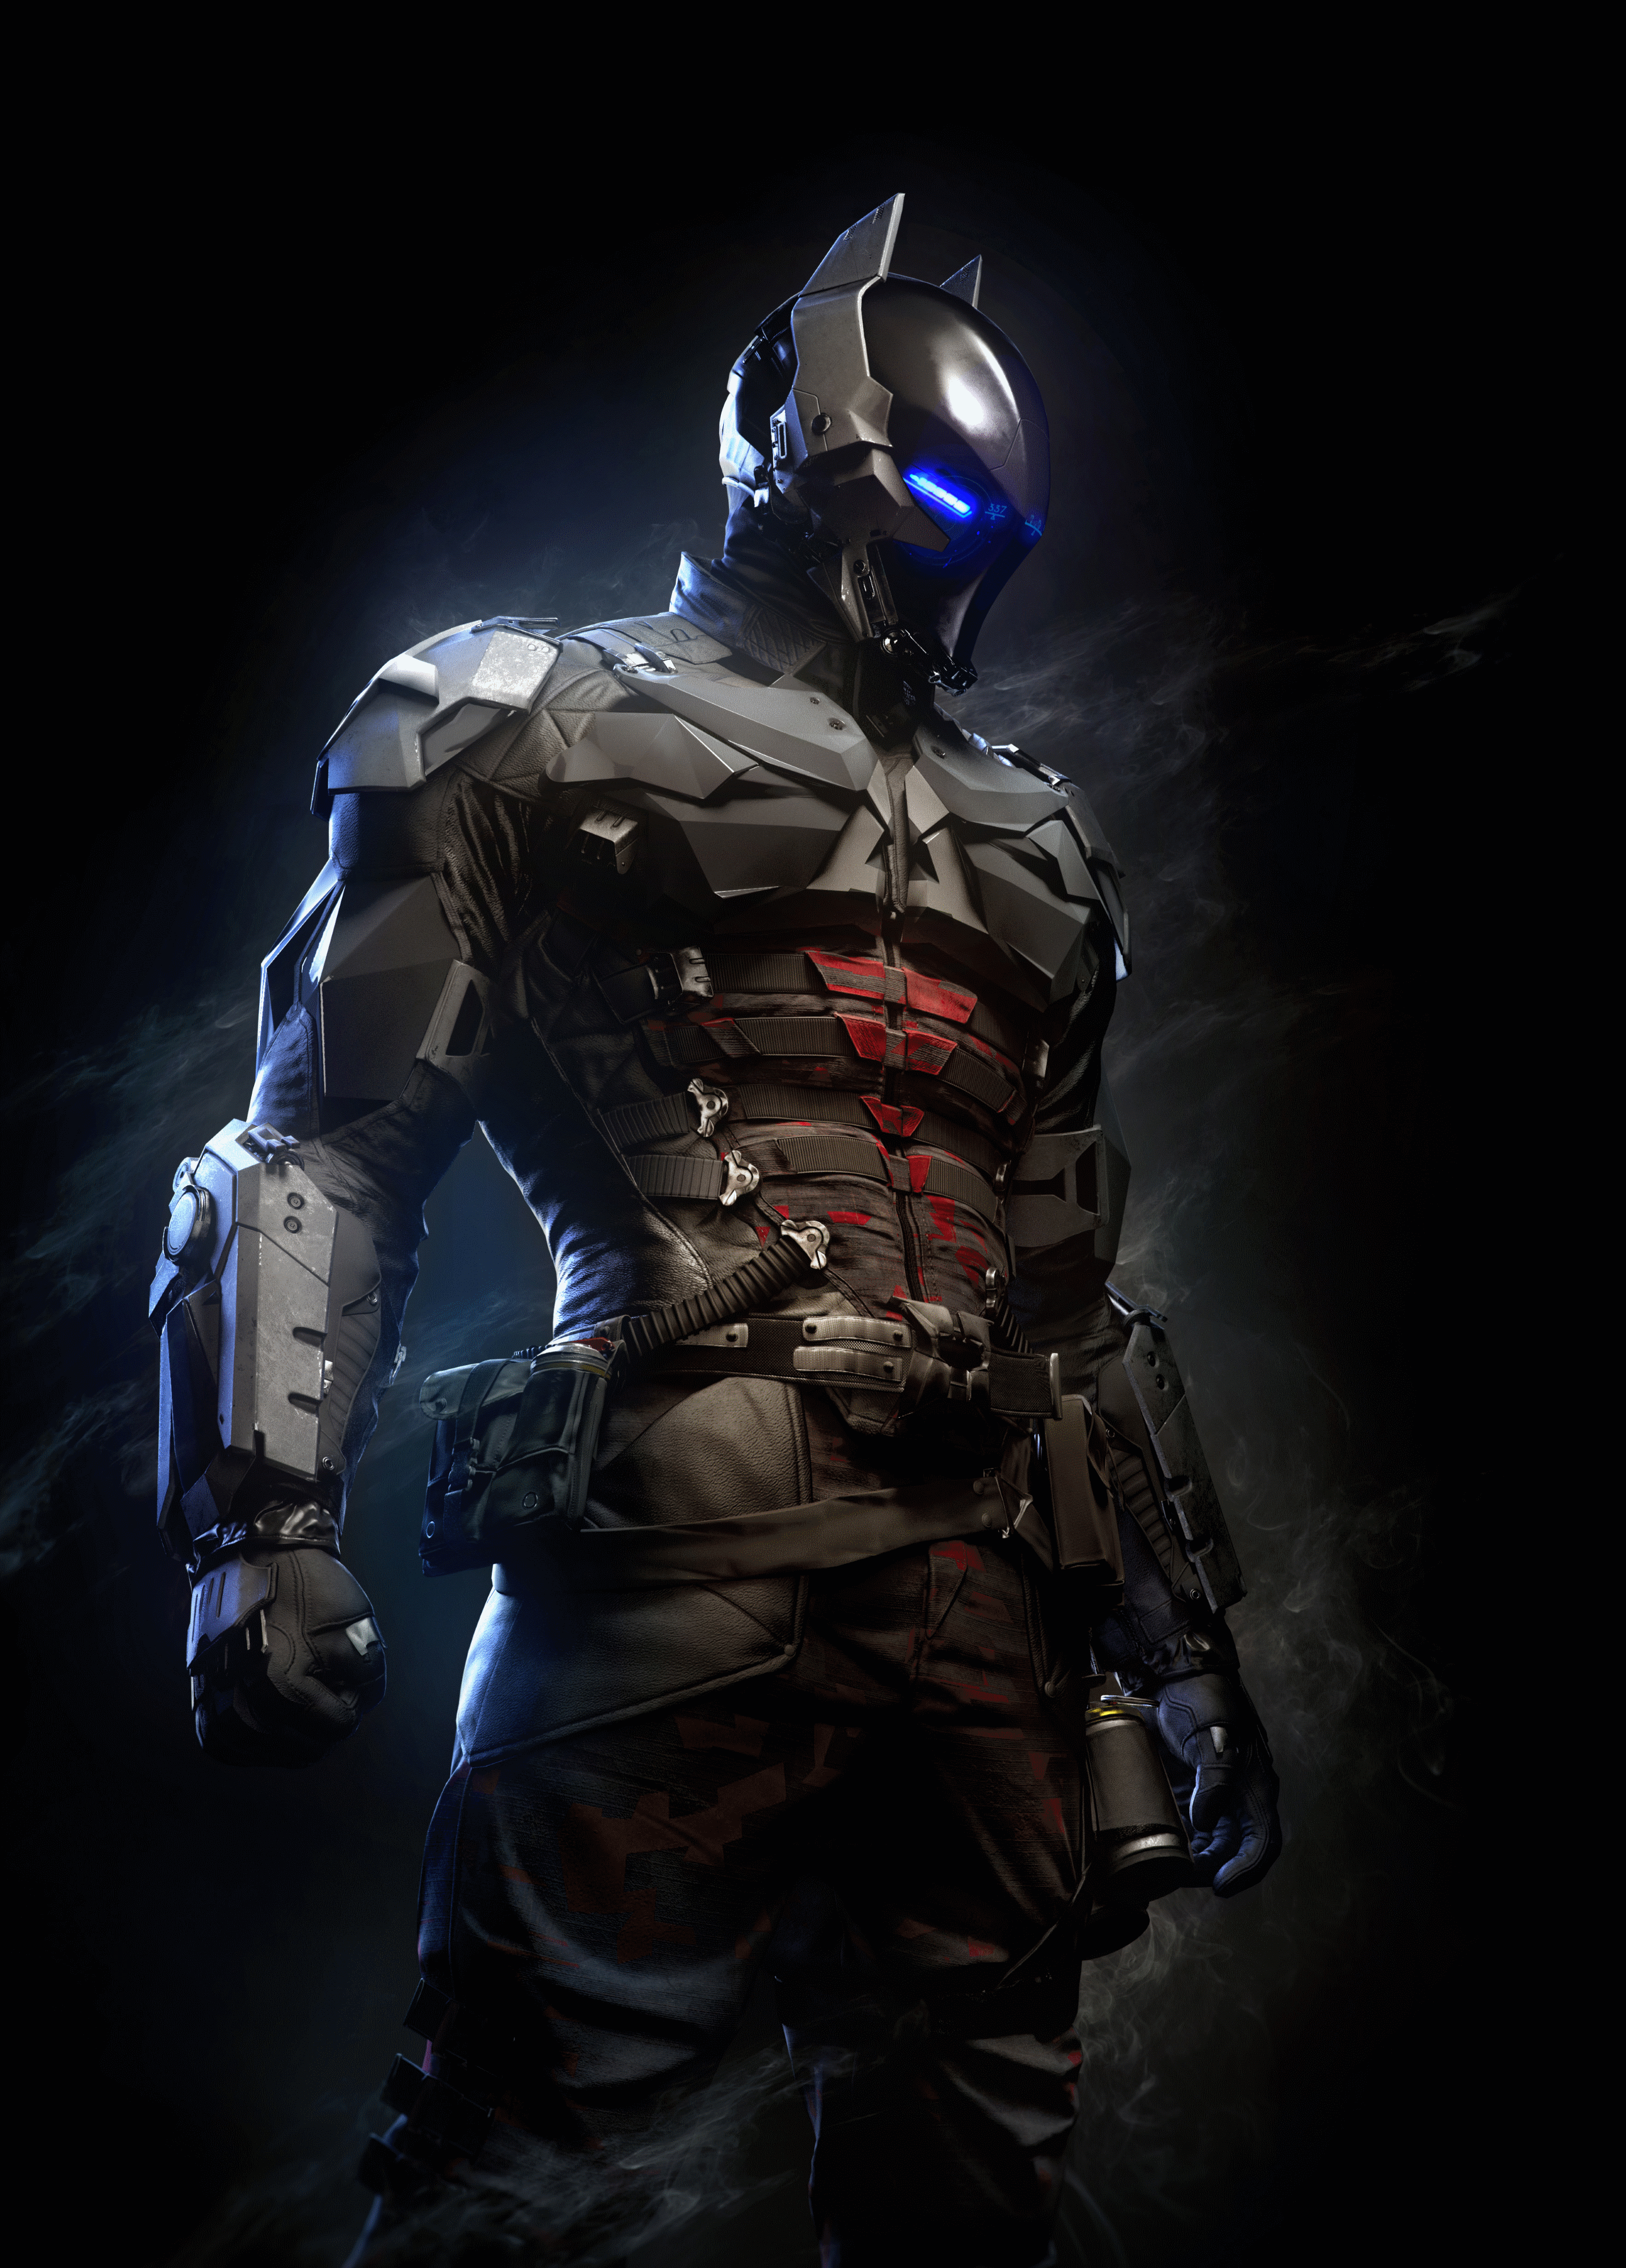 http://vignette2.wikia.nocookie.net/arkhamcity/images/f/fb/ArkhamKnight.png/revision/latest?cb=20140327132602